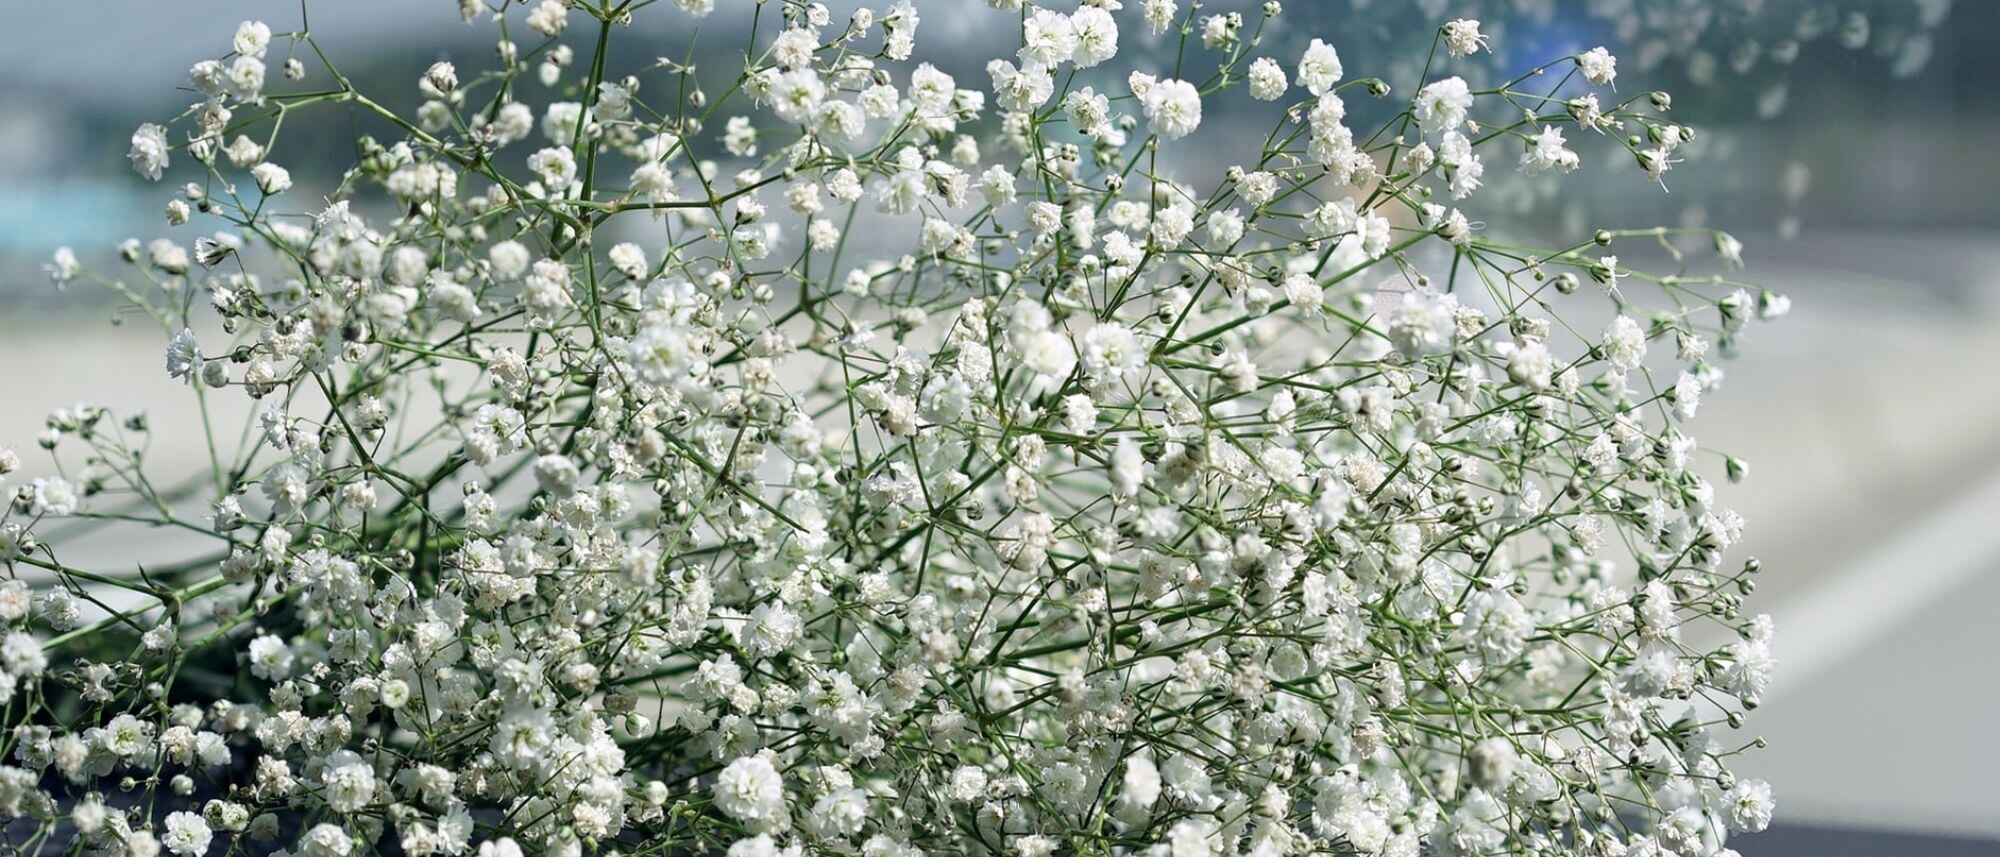 small white flowers of annual baby's breath flower seeds gathered in a bunch